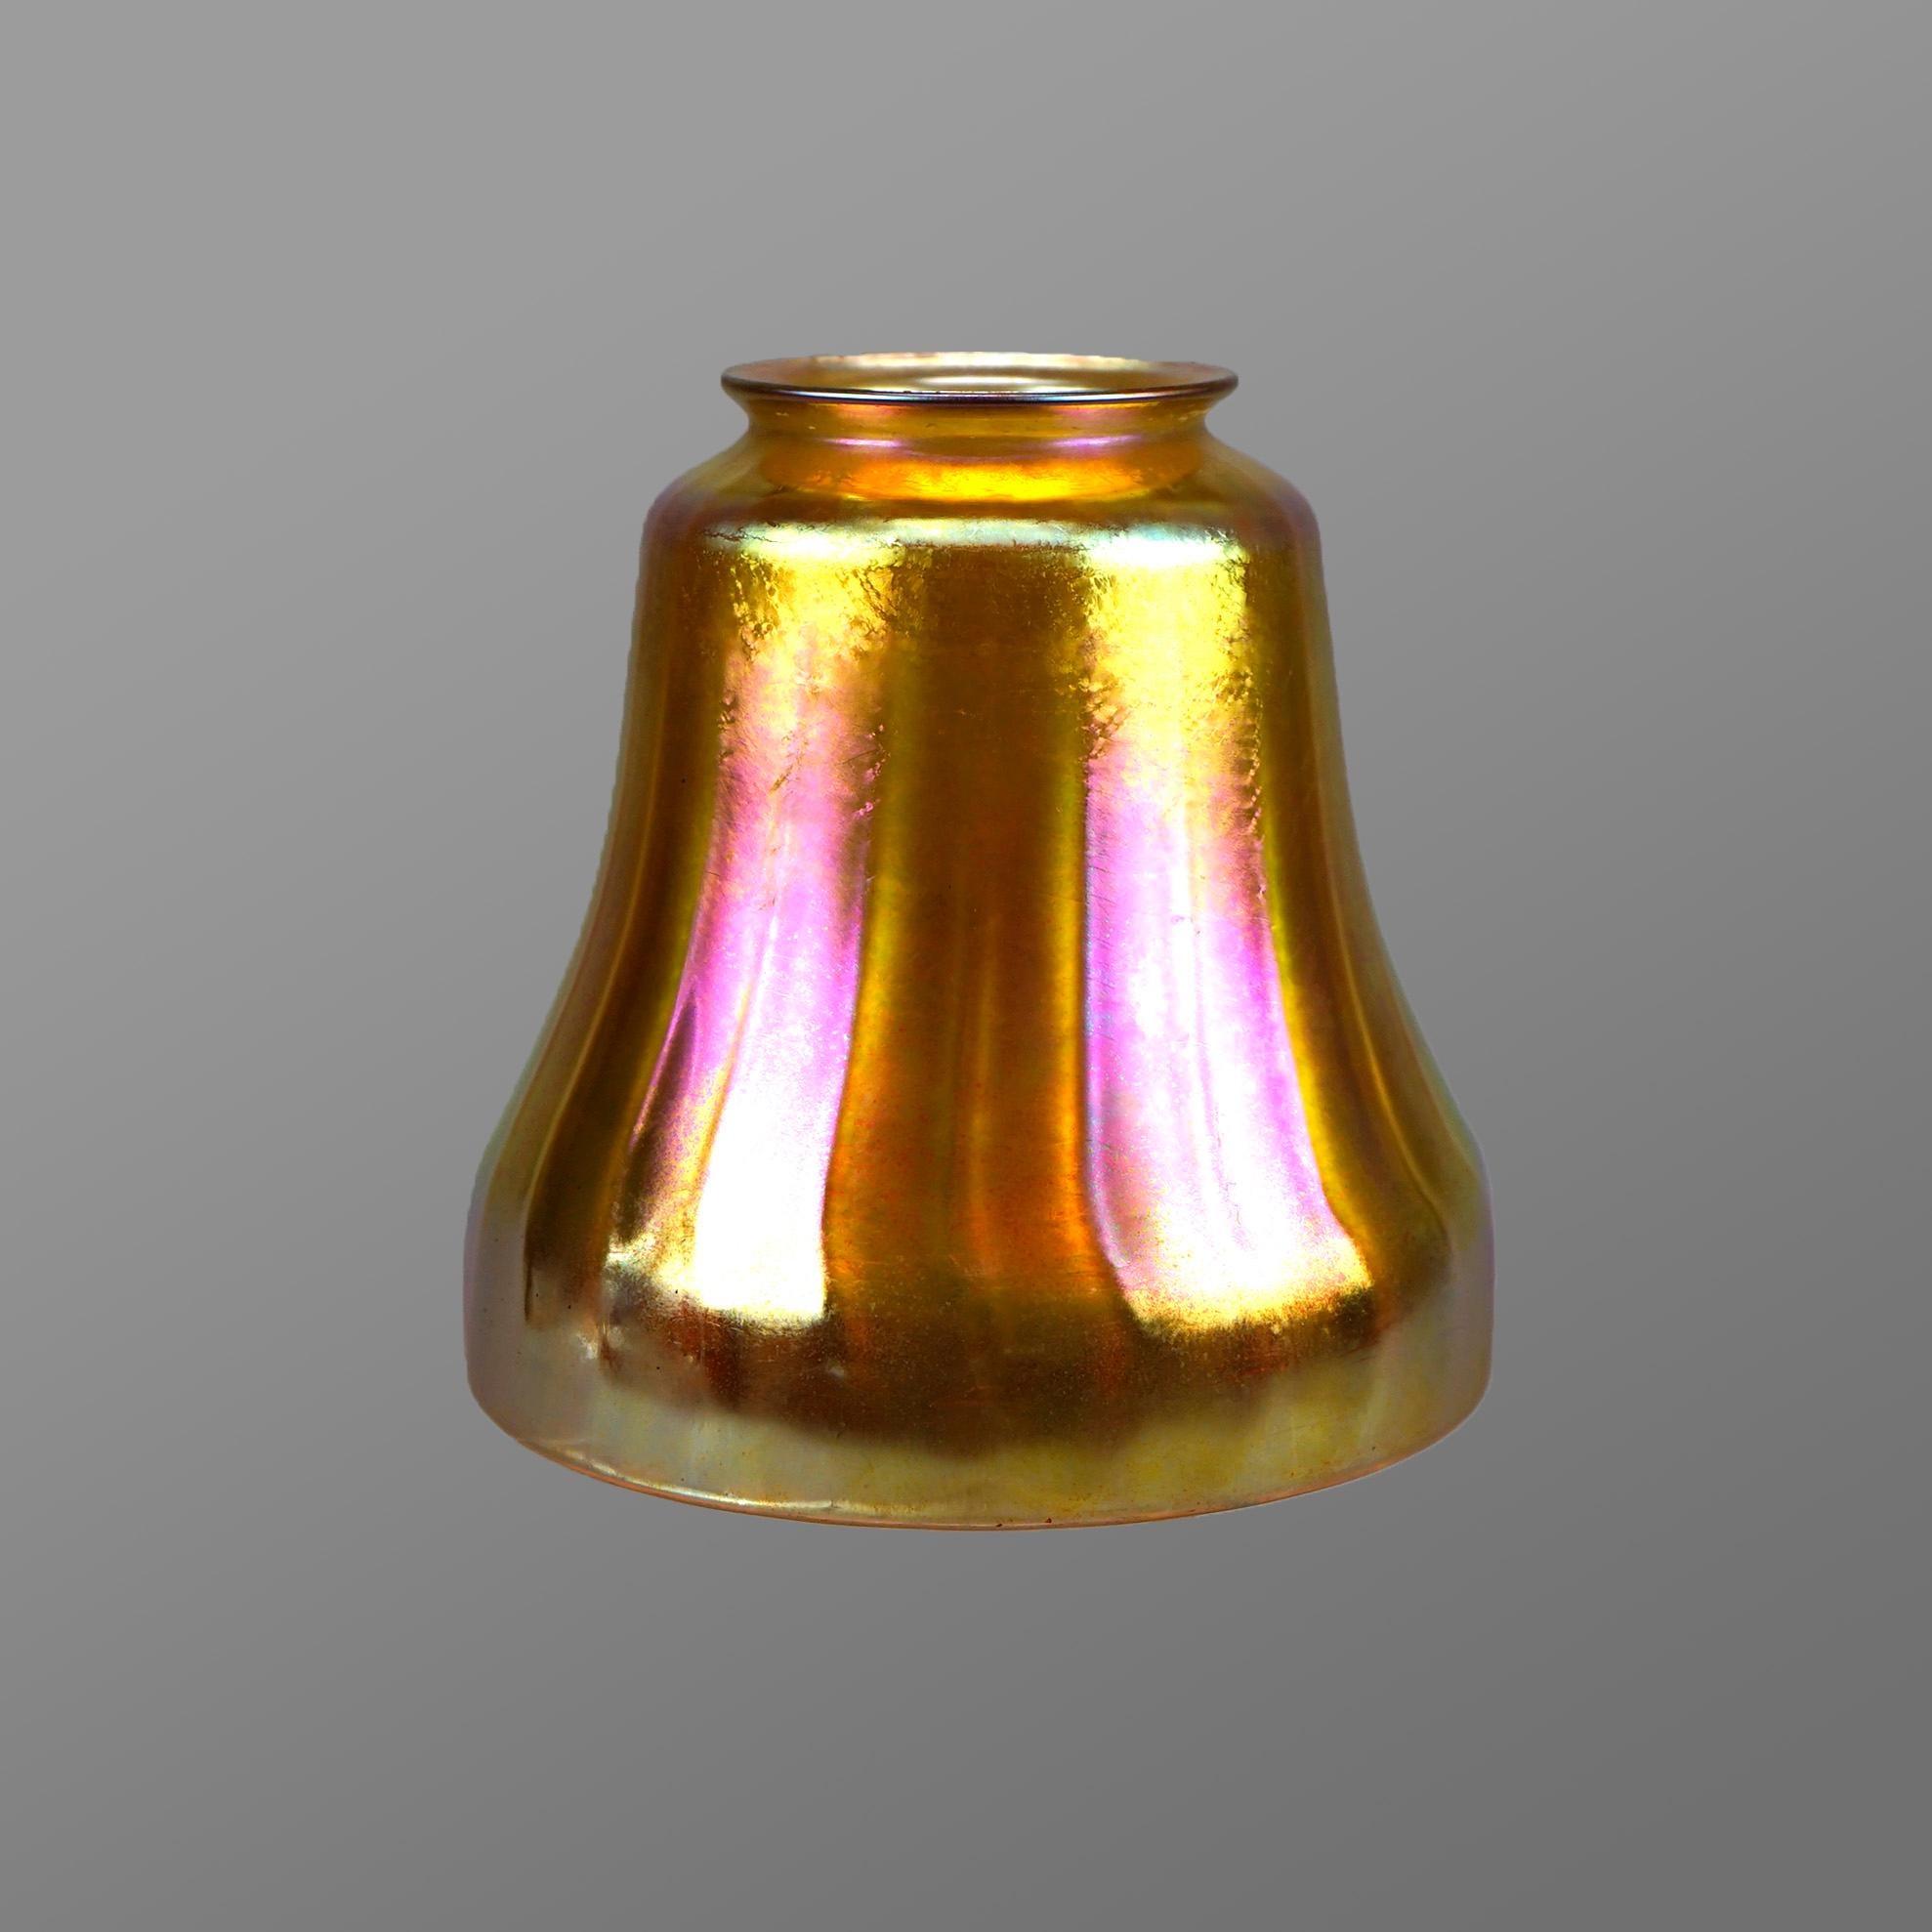 A large antique Arts and Crafts light shade by Steuben offers gold aurene art glass construction in bell form, unsigned, c1920

Measures- 6.5'' H x 6.25'' W x 6.25'' D.

Catalogue Note: Ask about DISCOUNTED DELIVERY RATES available to most regions